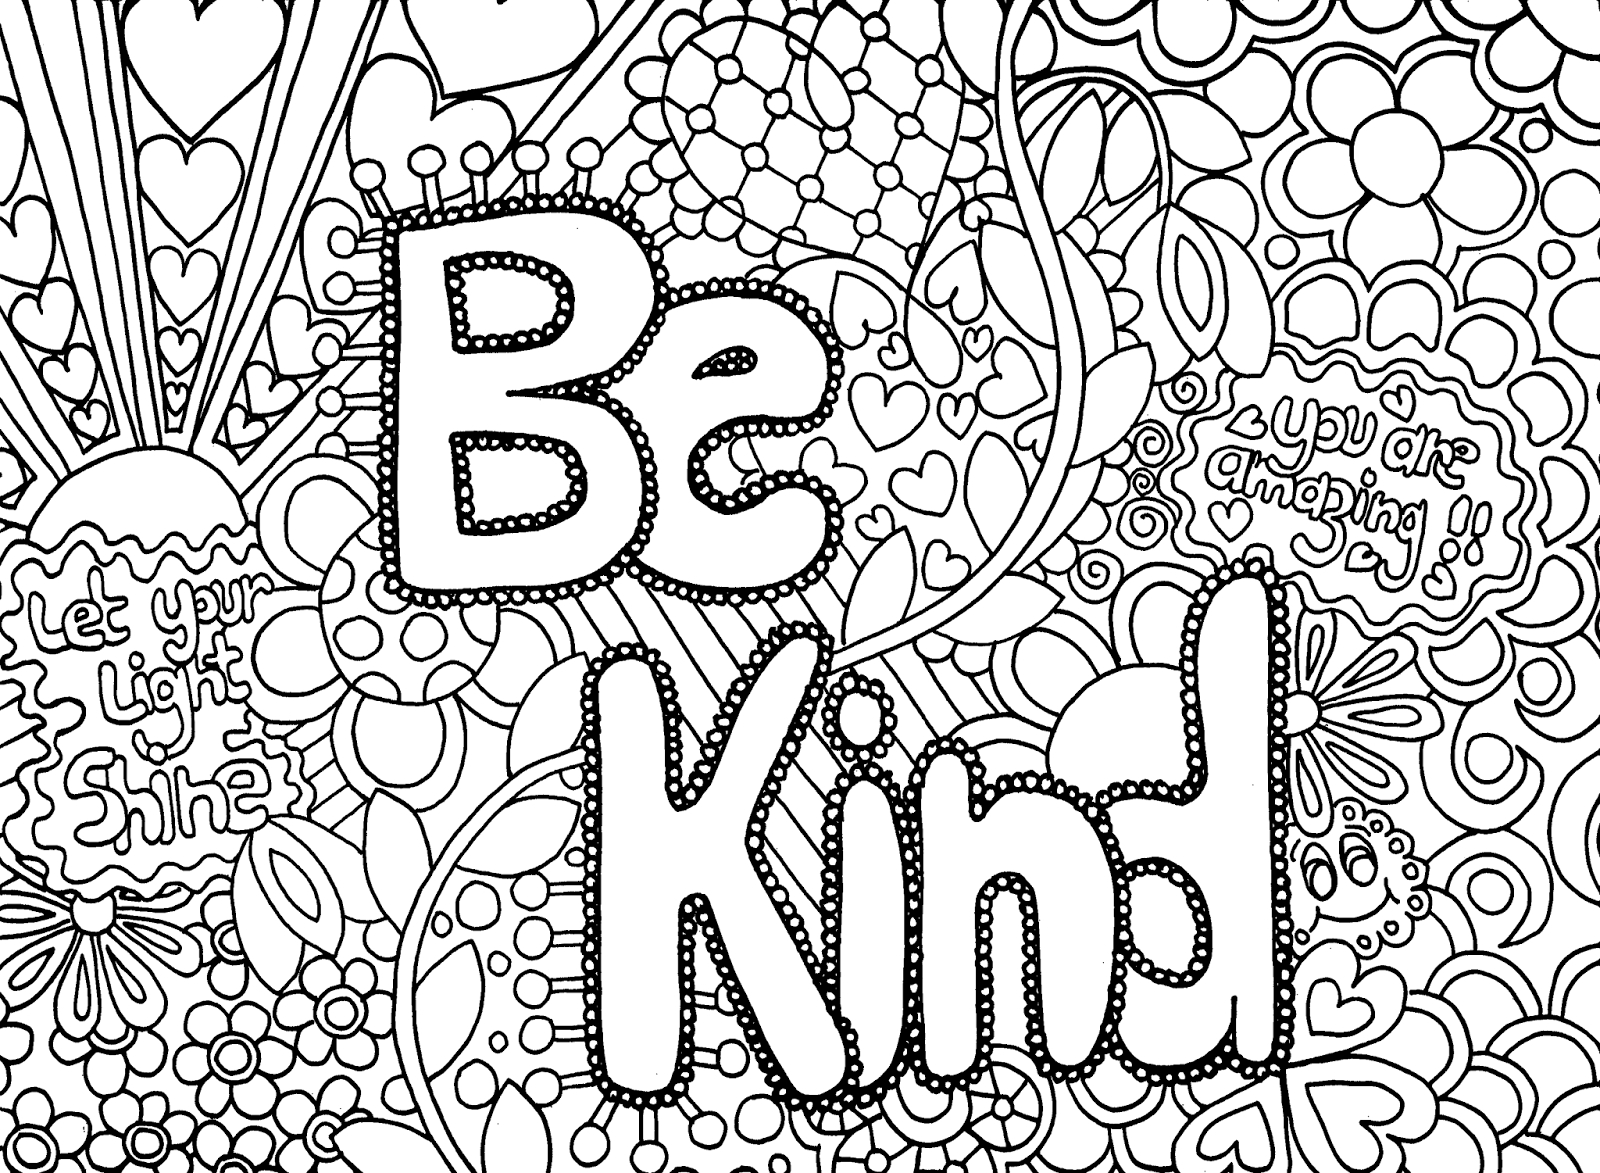 Coloring Pages For Teenagers - Printable Free Coloring Pages